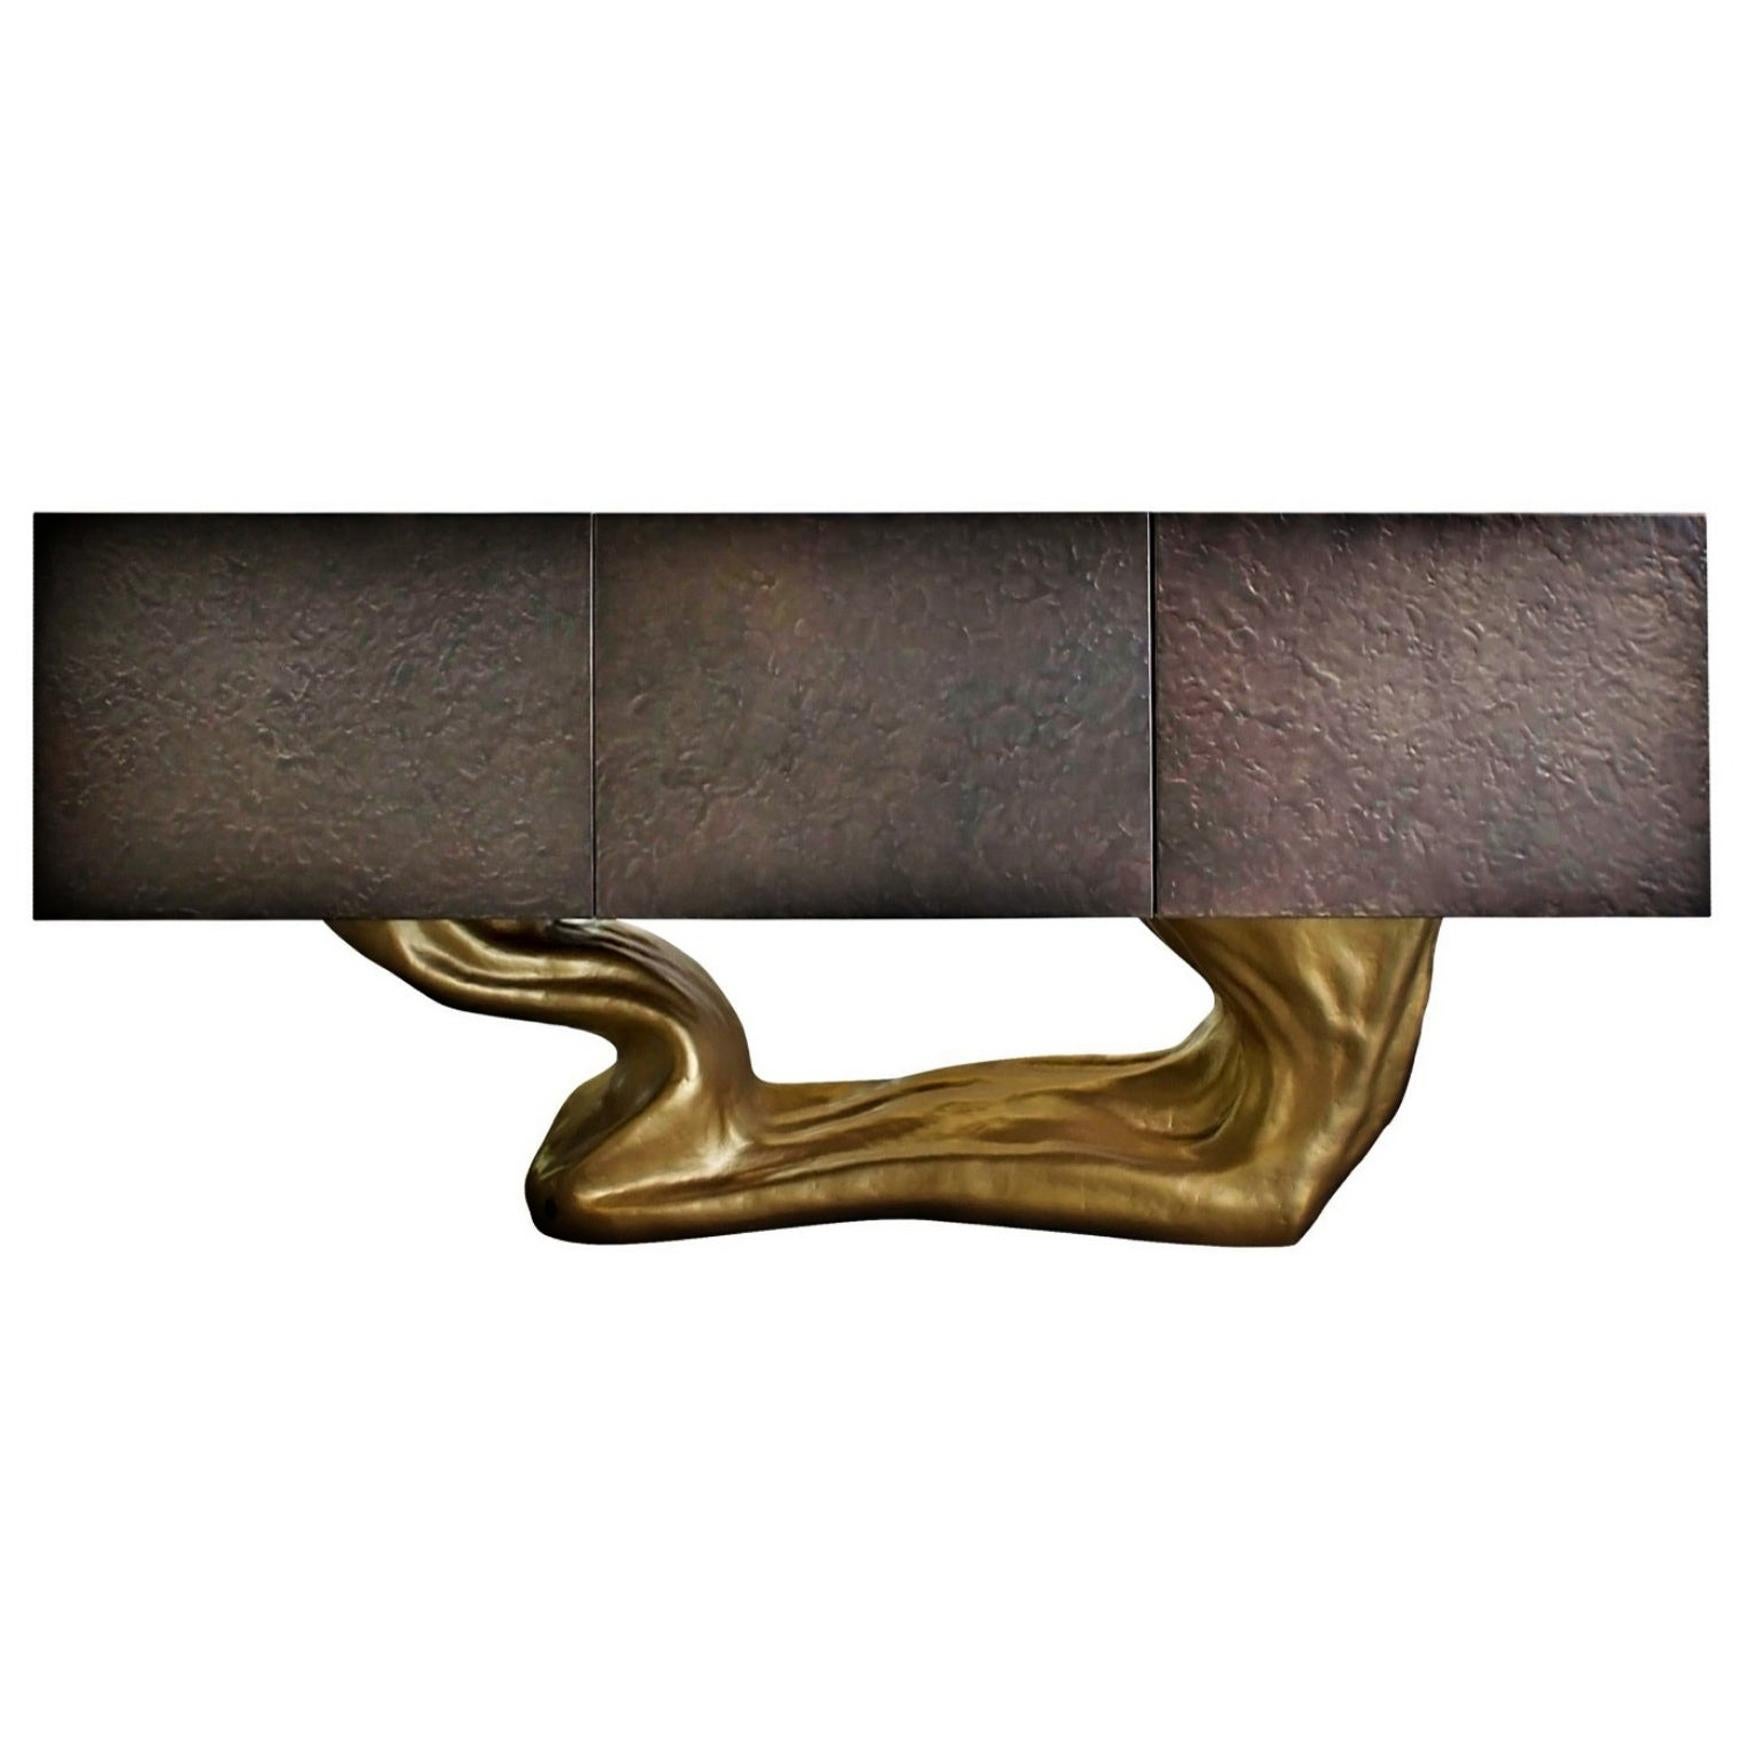 New Design Sideboard in Wood Finished in Brass Color on "Organic" Texture For Sale